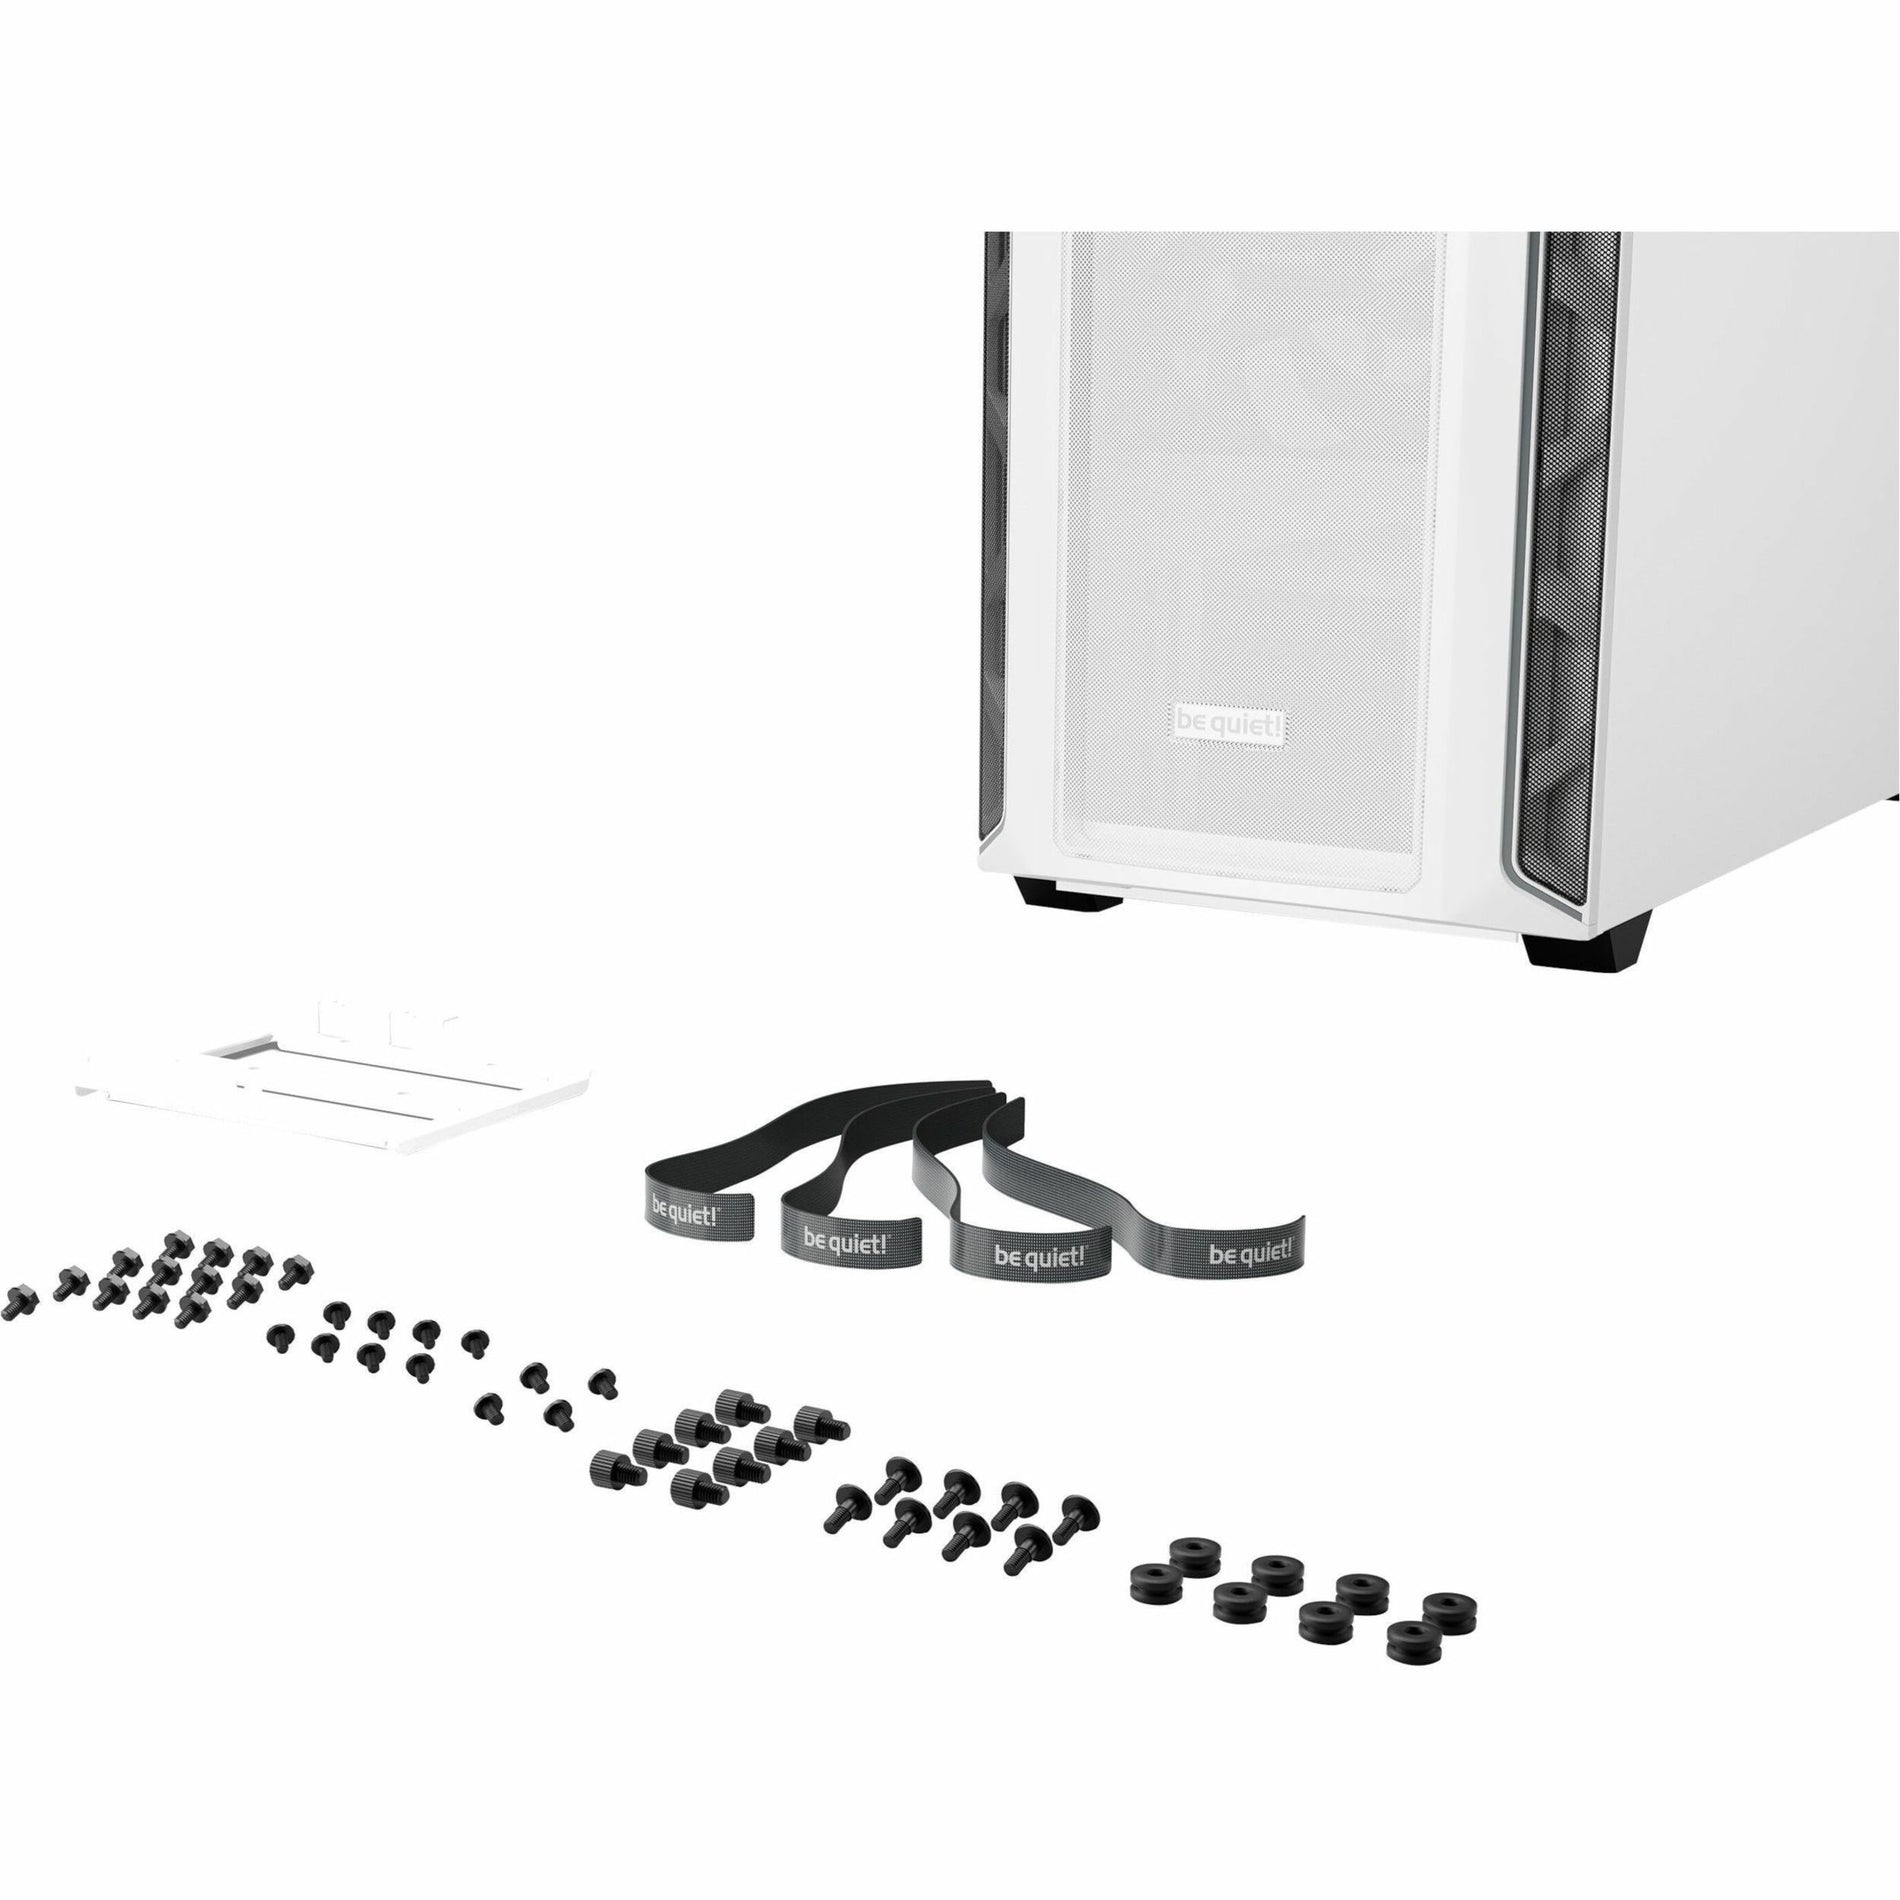 be quiet! BGW62 Shadow Base 800 DX White, Gaming Computer Case